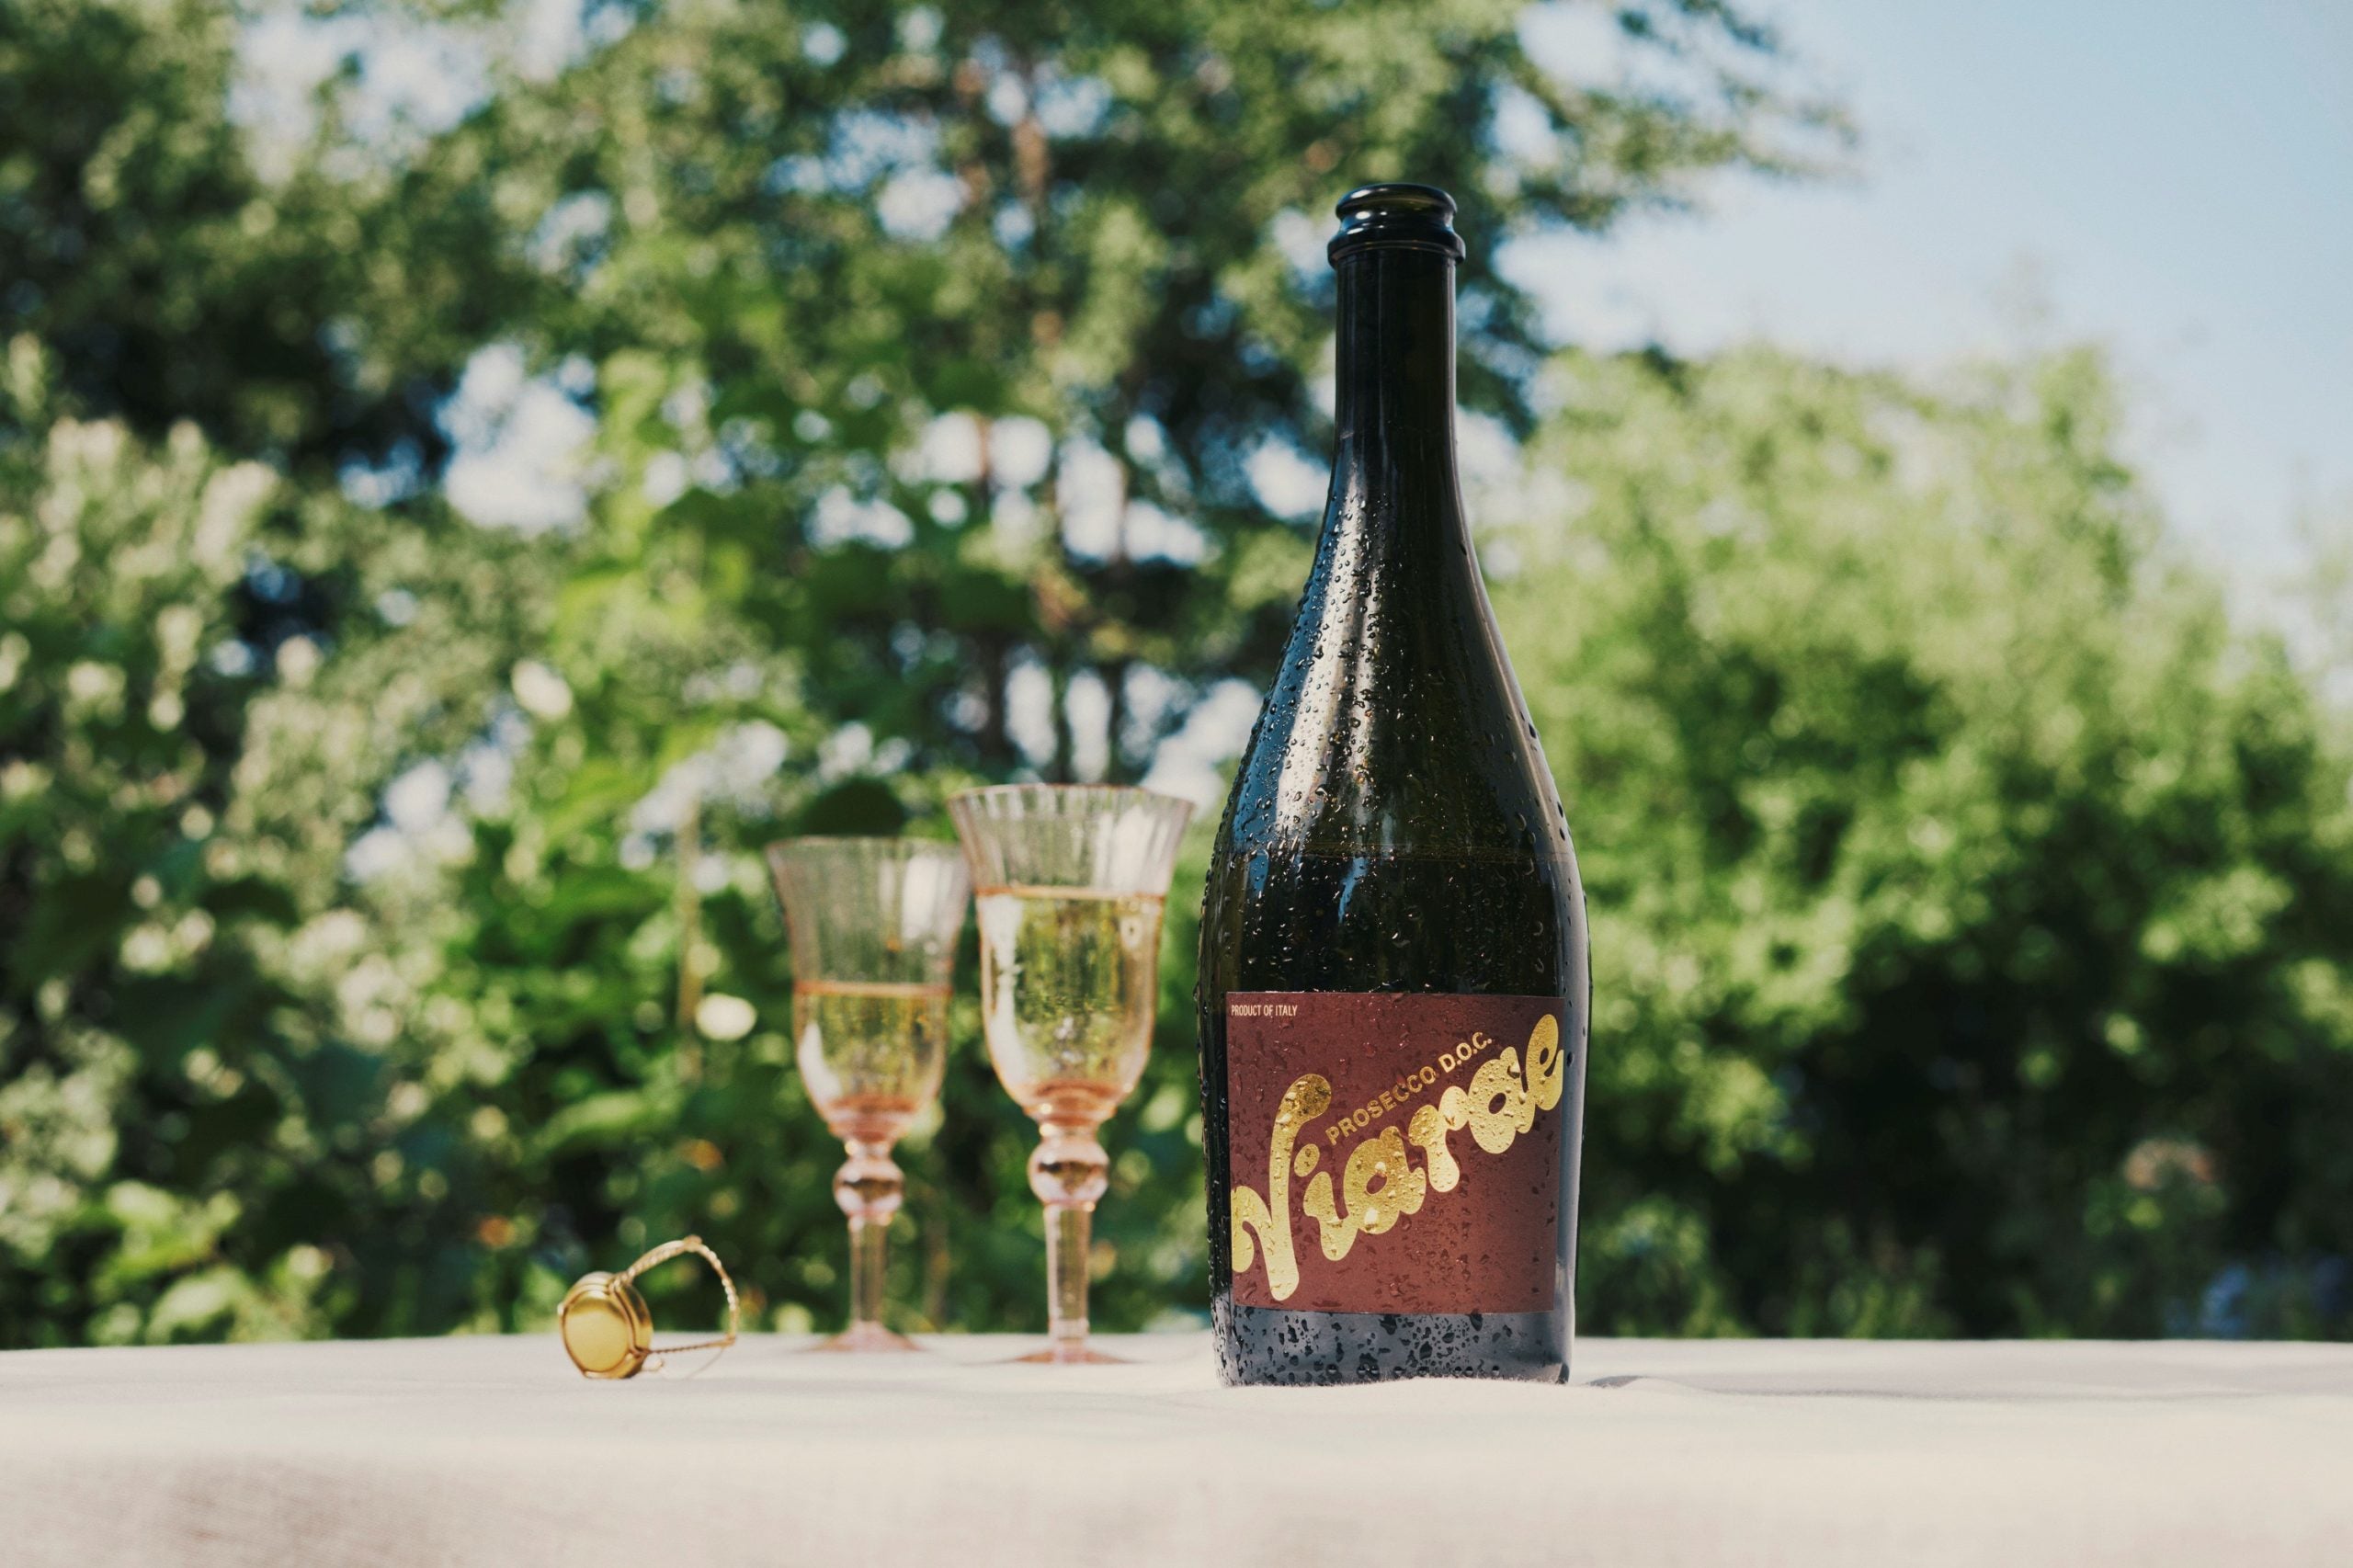 Let’s Toast: We Were Invited To Taste Issa Rae’s Bright, Lively And Crisp ViaRae Prosecco